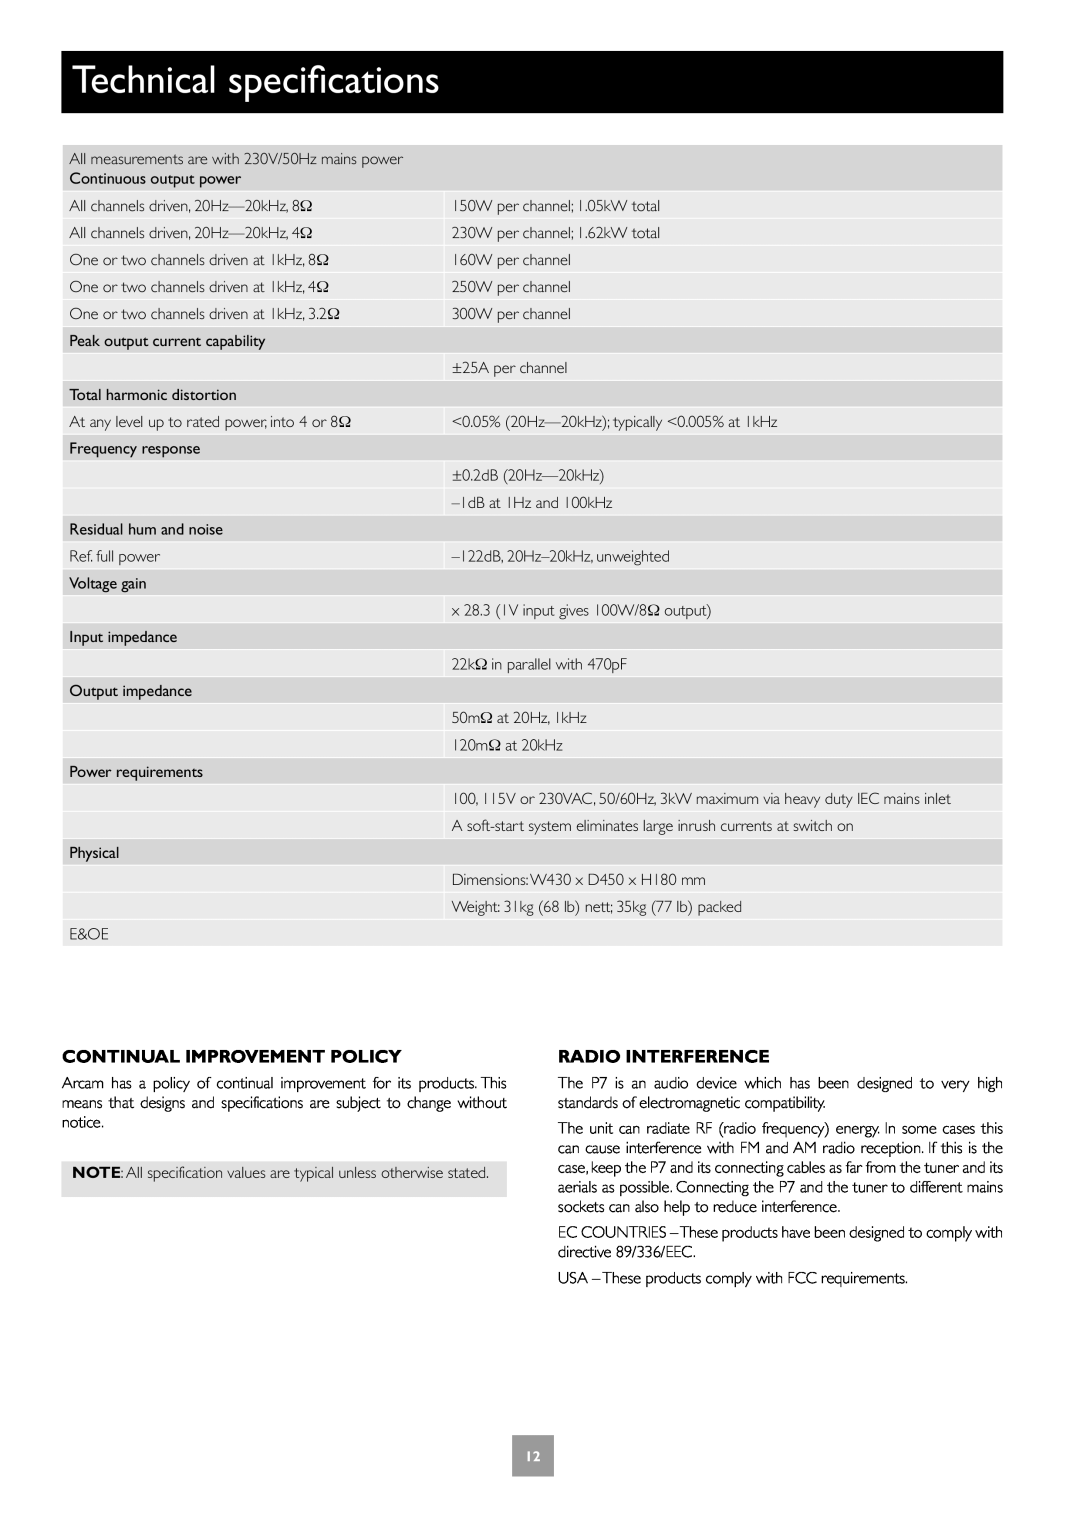 Arcam Multichannel Power Amplifier manual Technical specifications, Continual Improvement Policy, Radio Interference 